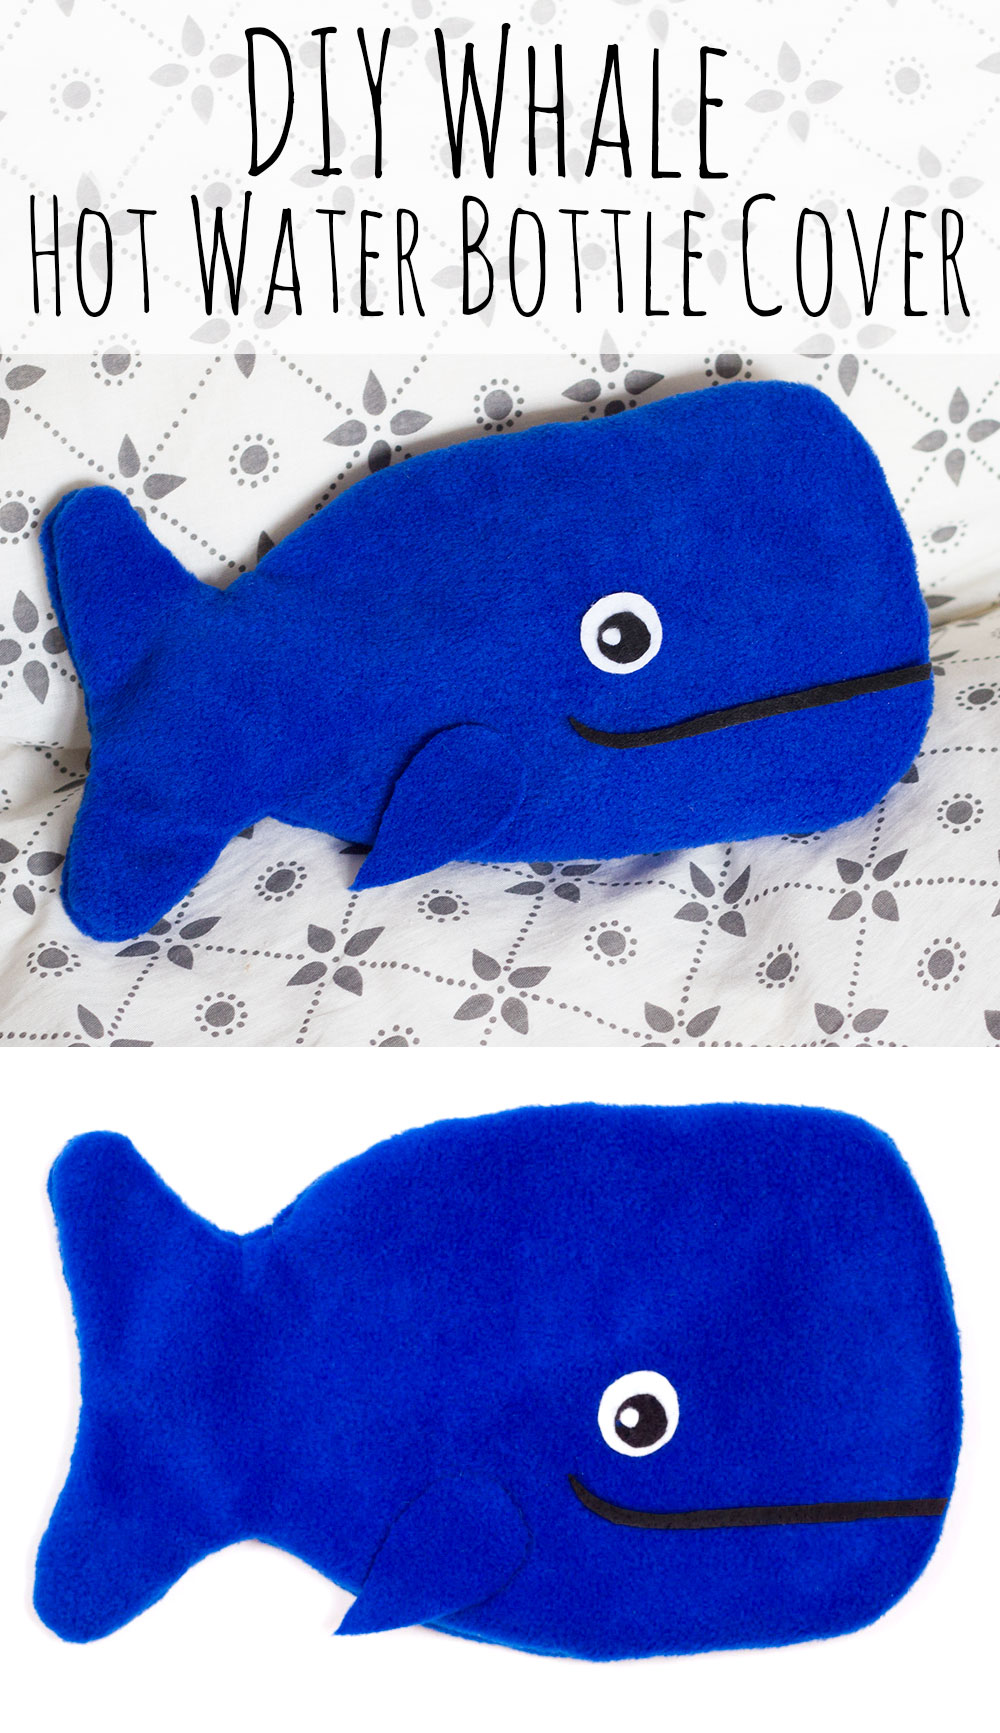 Hot-water bottle cover Sailors Bay Blue